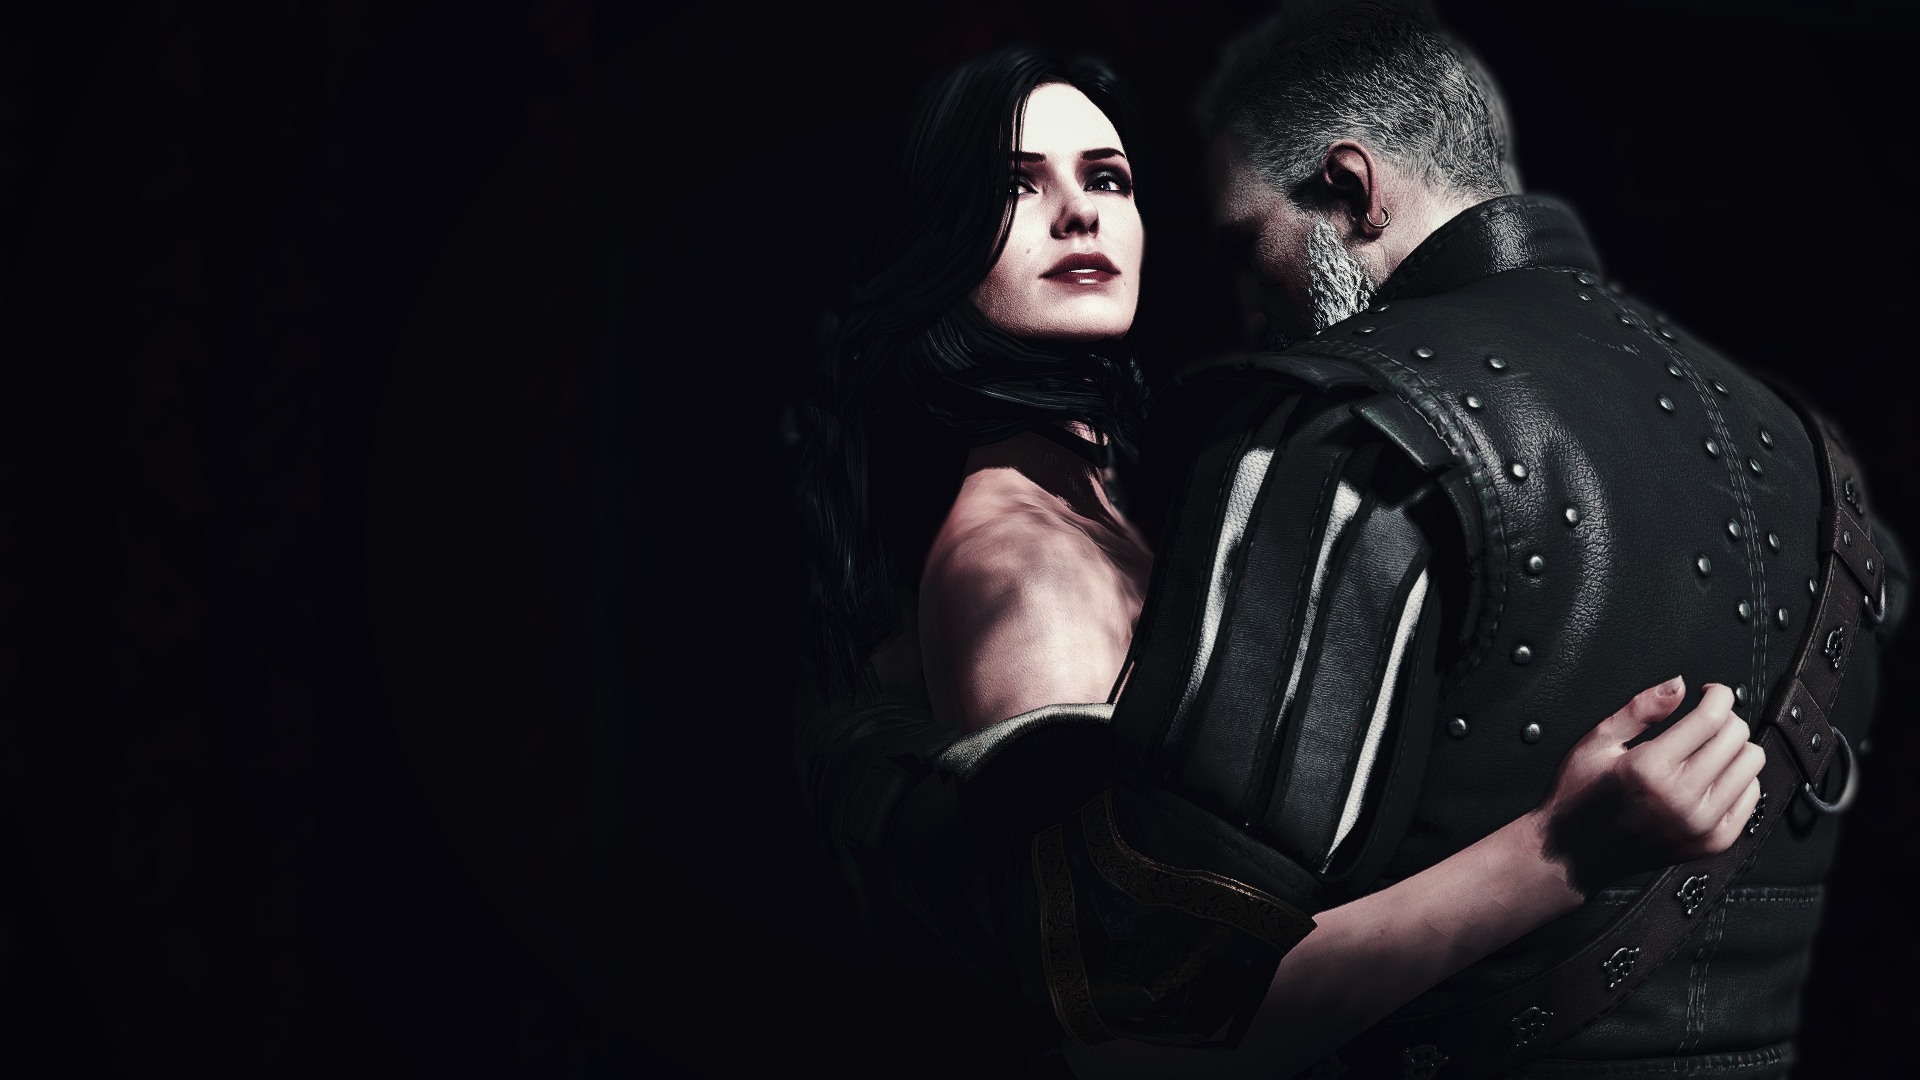 General 1920x1080 The Witcher The Witcher 3: Wild Hunt Yennefer of Vengerberg video game characters CD Projekt RED